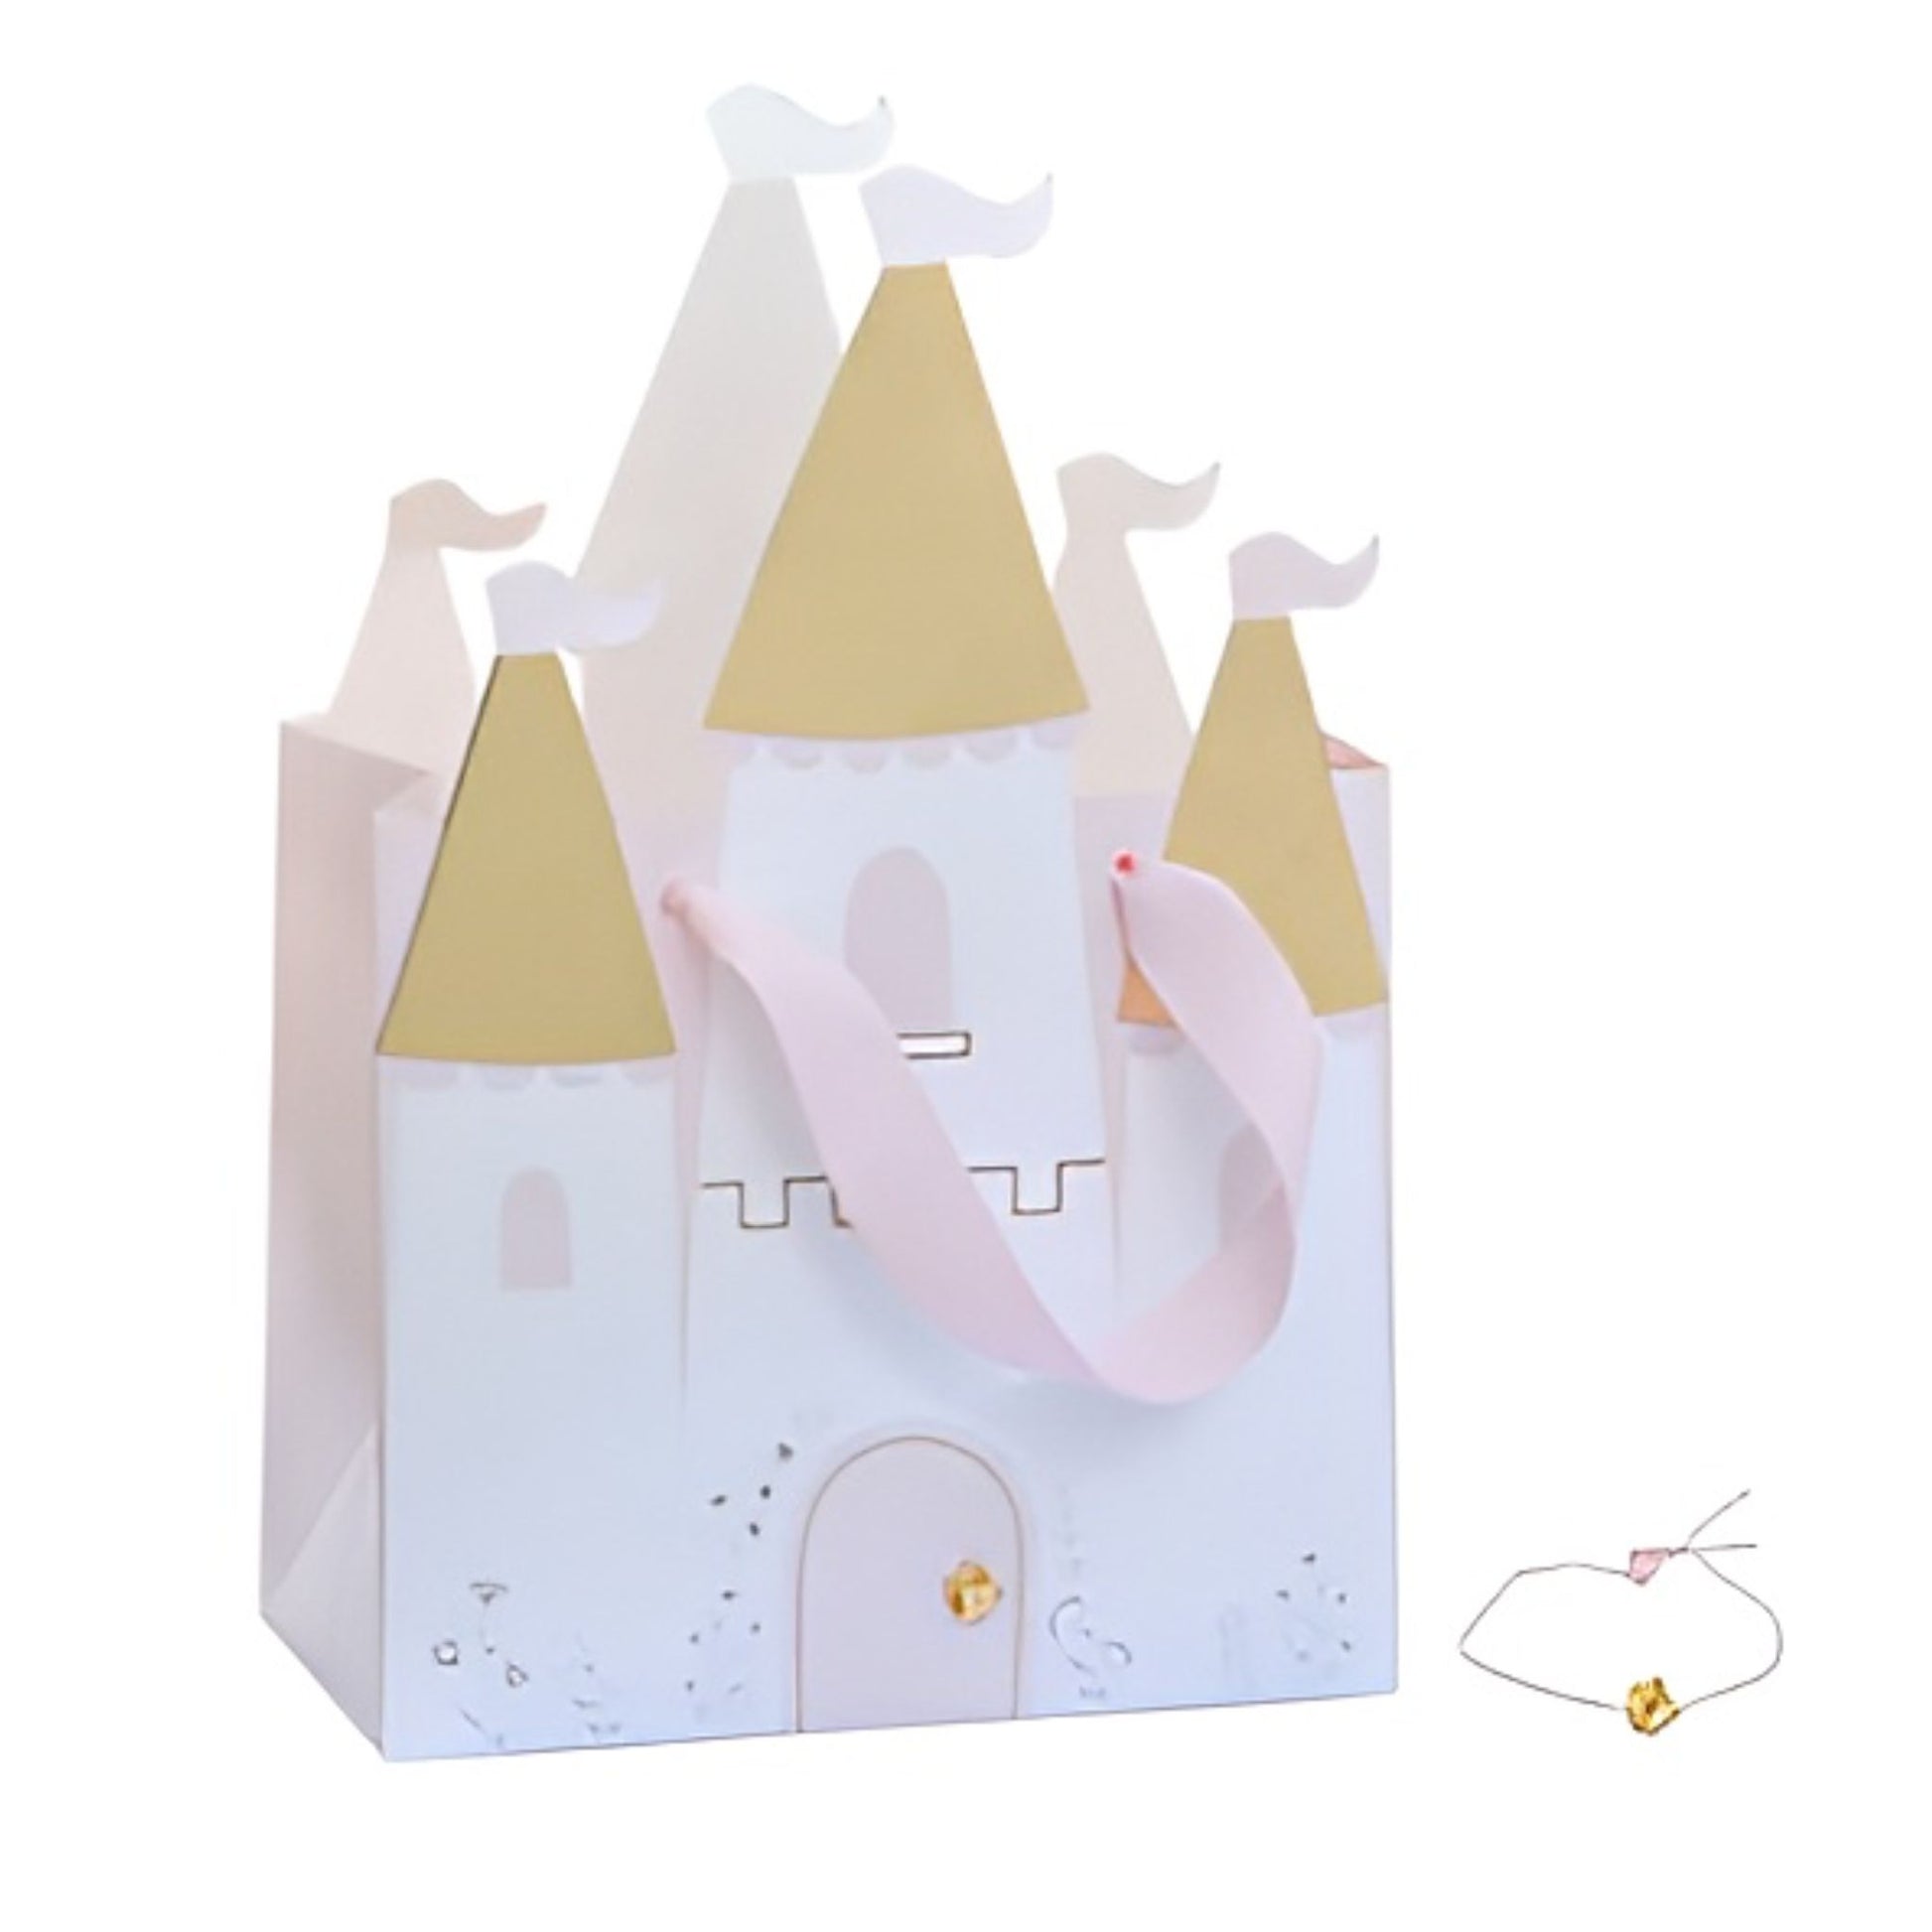 Beautiful Princess Party Bag in shape of Castle in Pink, White and Gold. Includes a bracelet